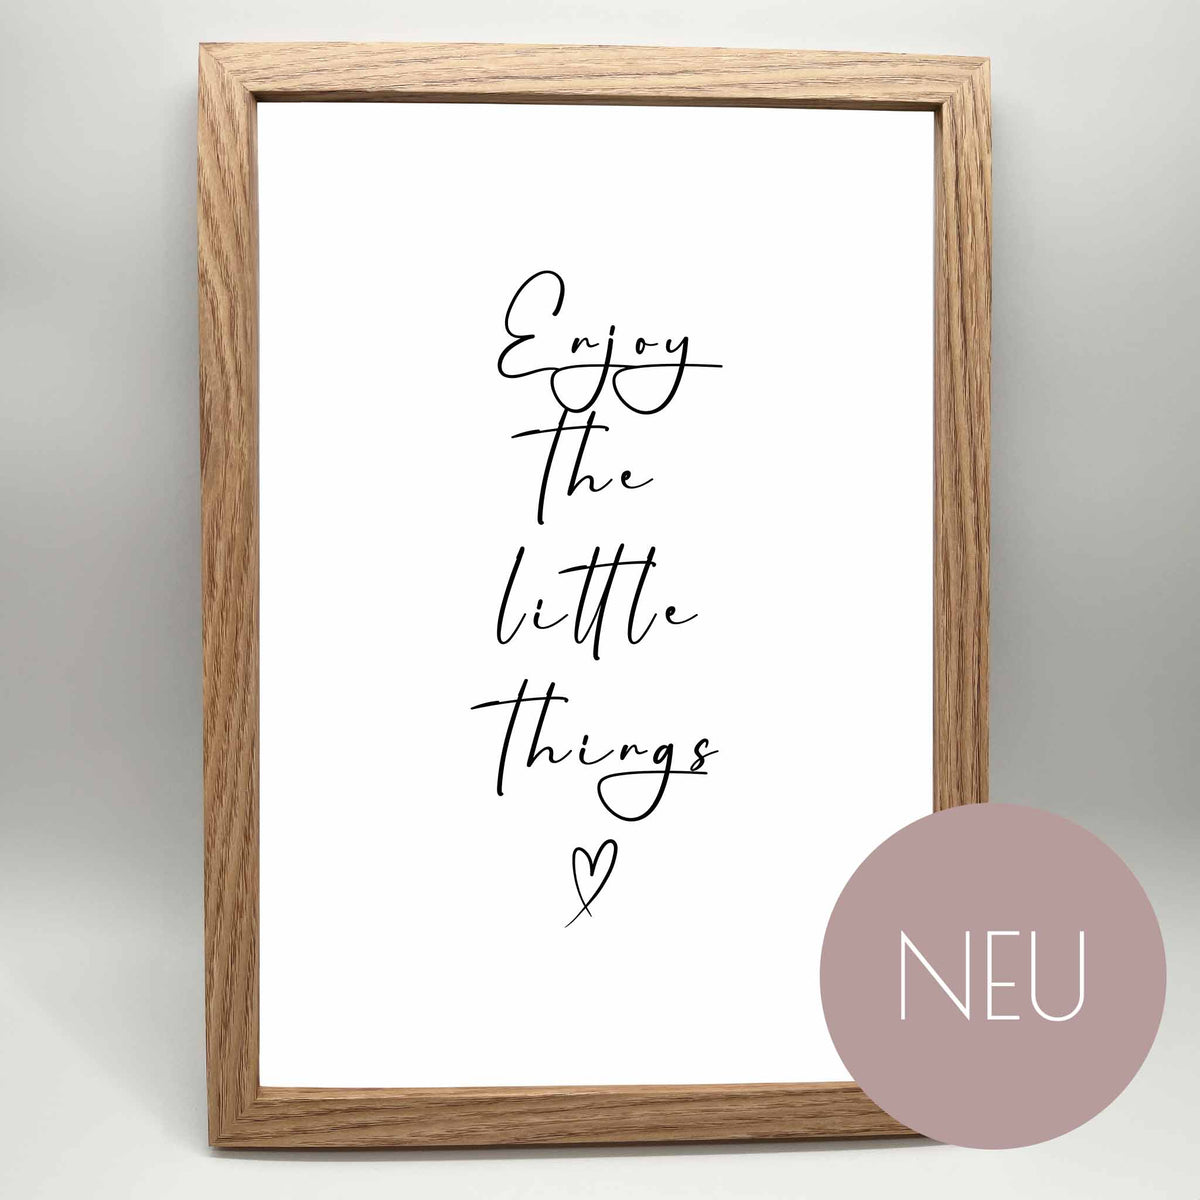 Poster ⋙ENJOY THE LITTLE THINGS⋘